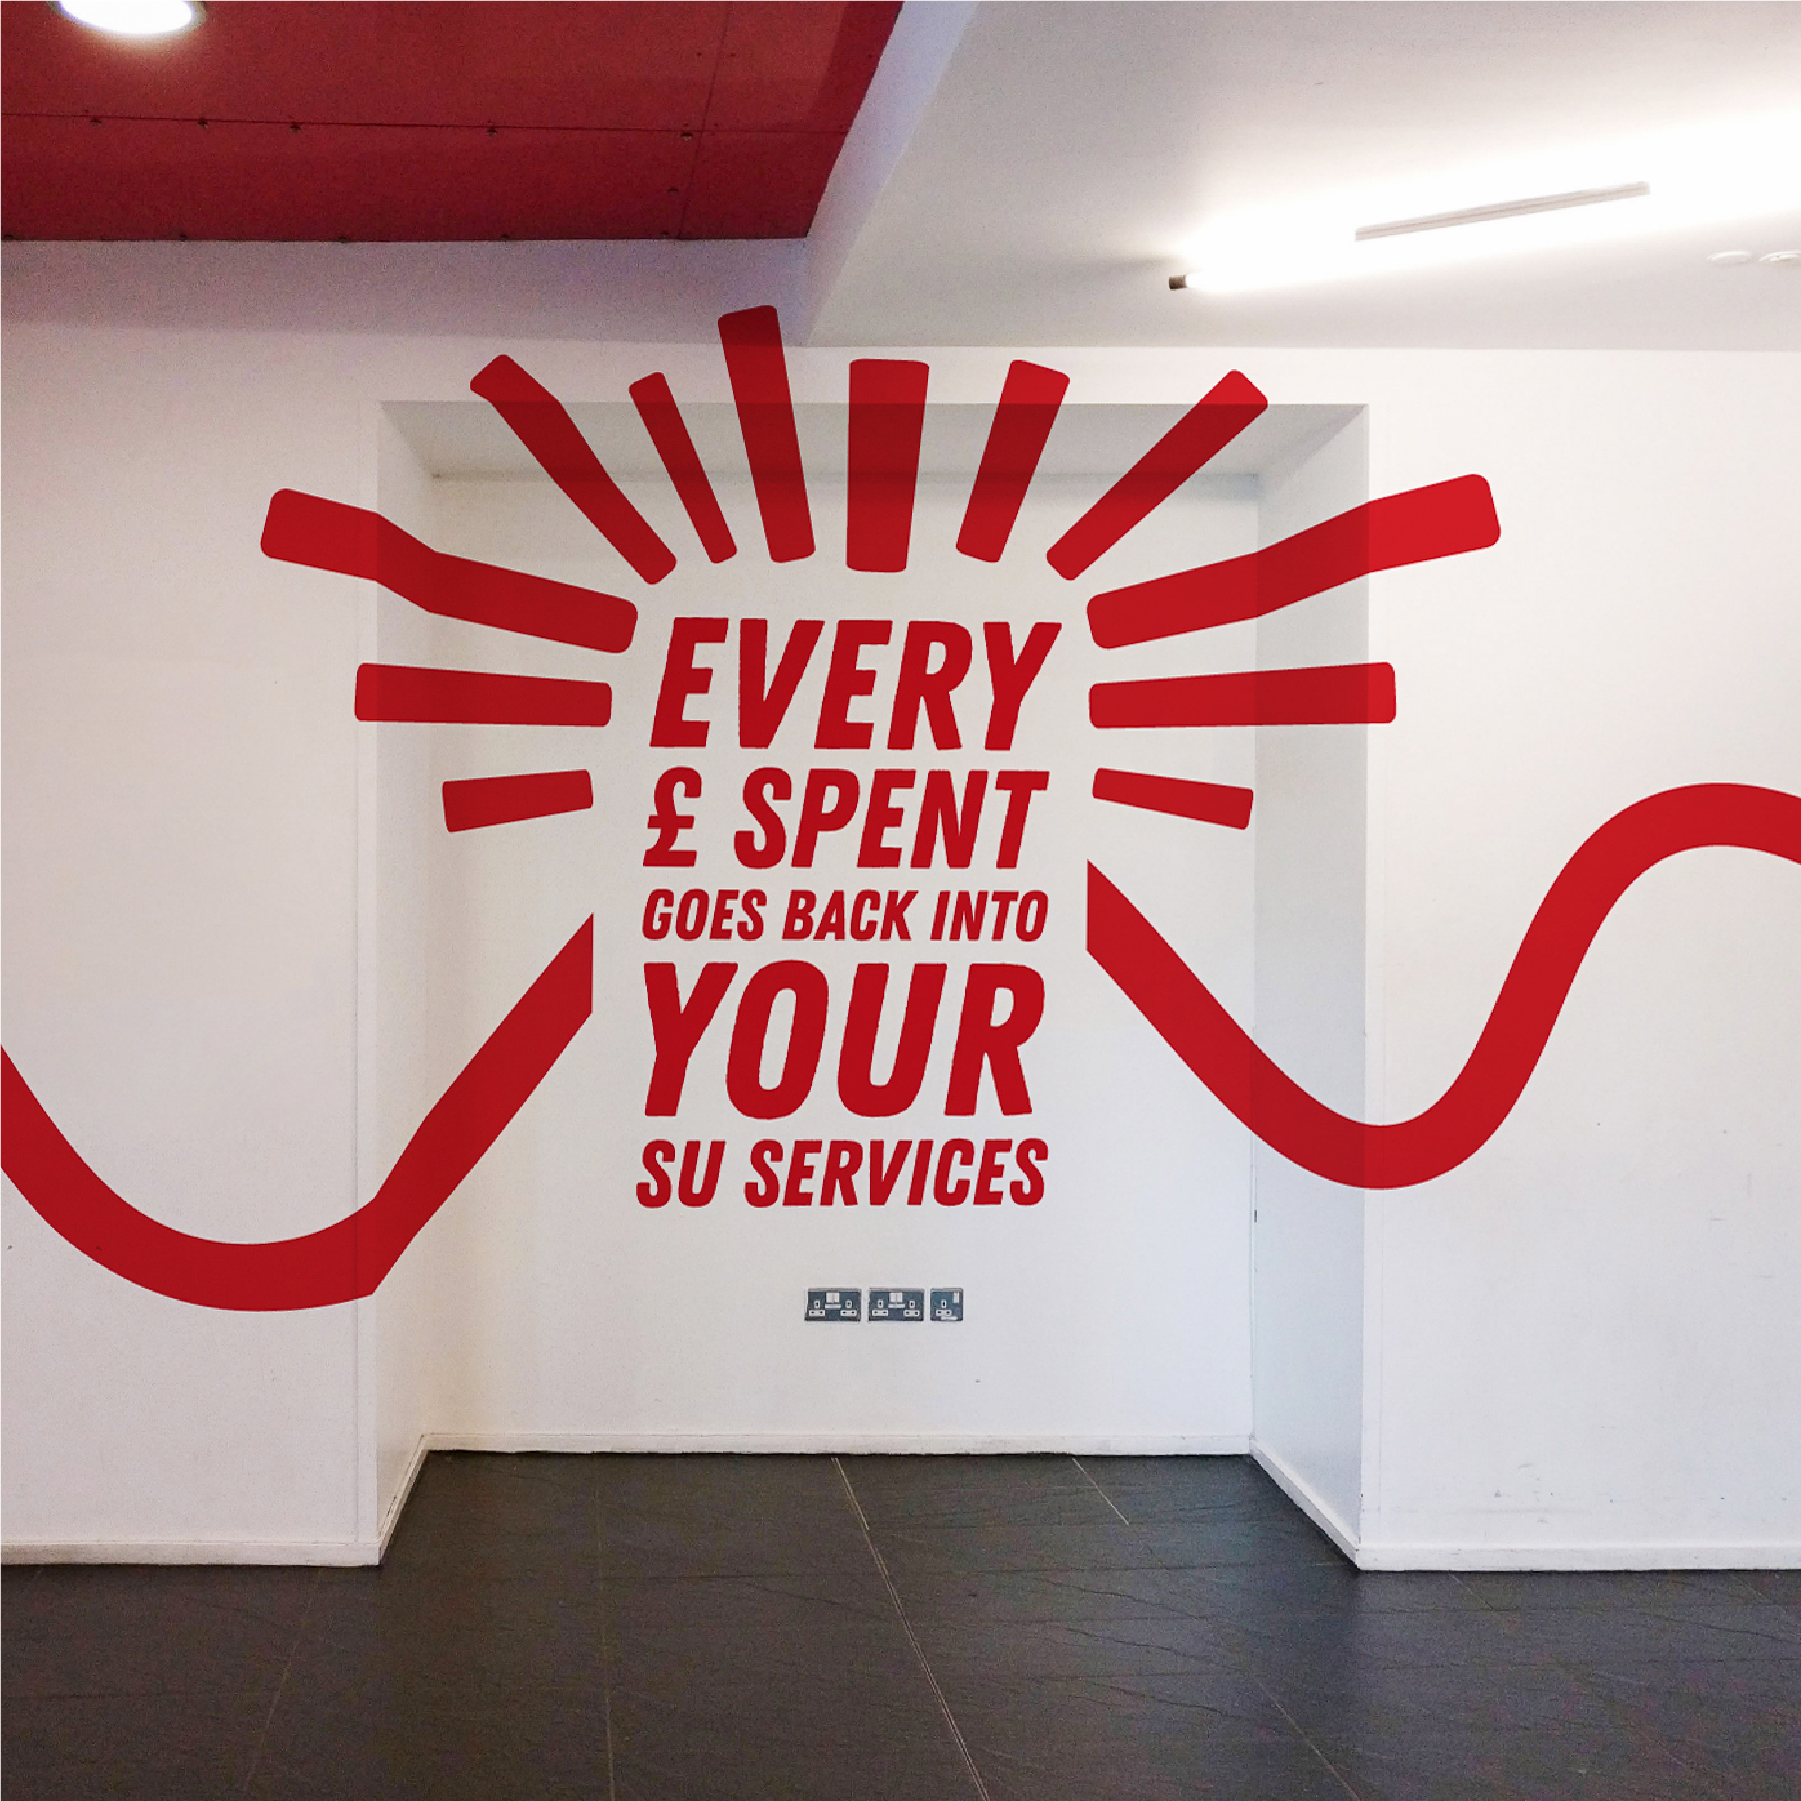 Written in red on a white wall 'Every pound Spent goes back into your SU Services' with red lines in an arch over the top.